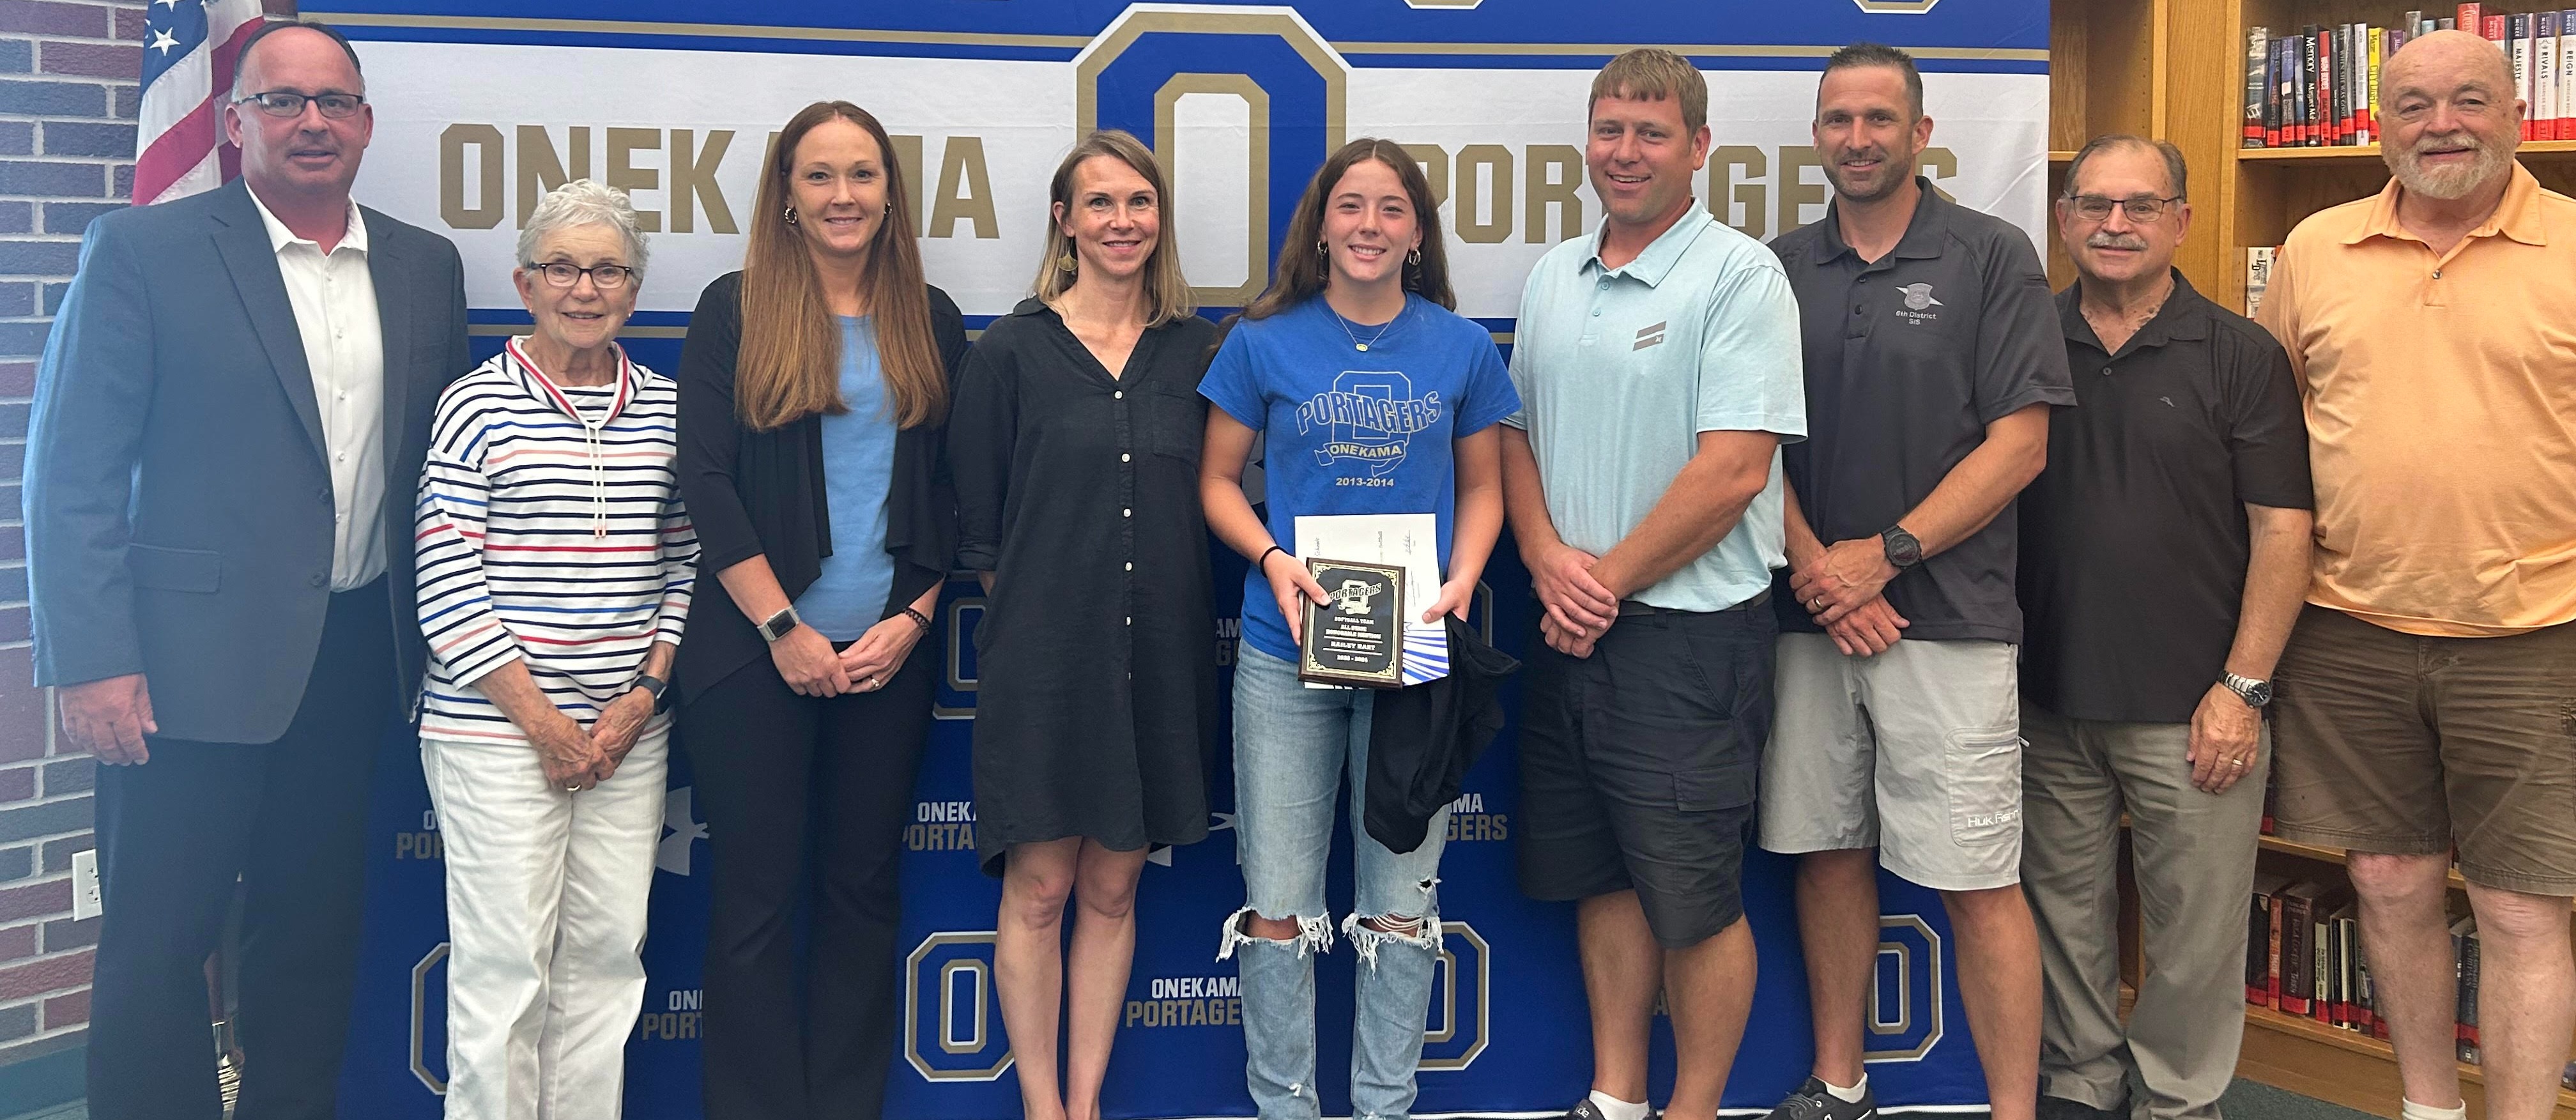 Rising junior Hailey Hart was recognized at a recent school board meeting for receiving All-State Honorable Mention honors in softball this season.